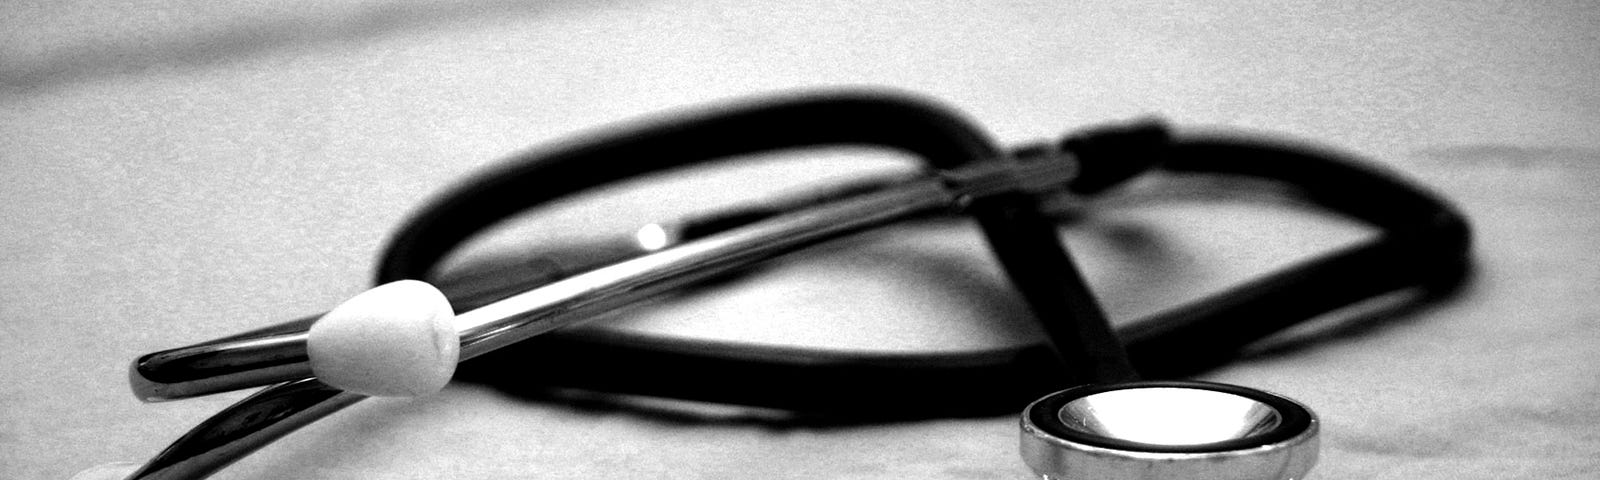 stethoscope in black and white